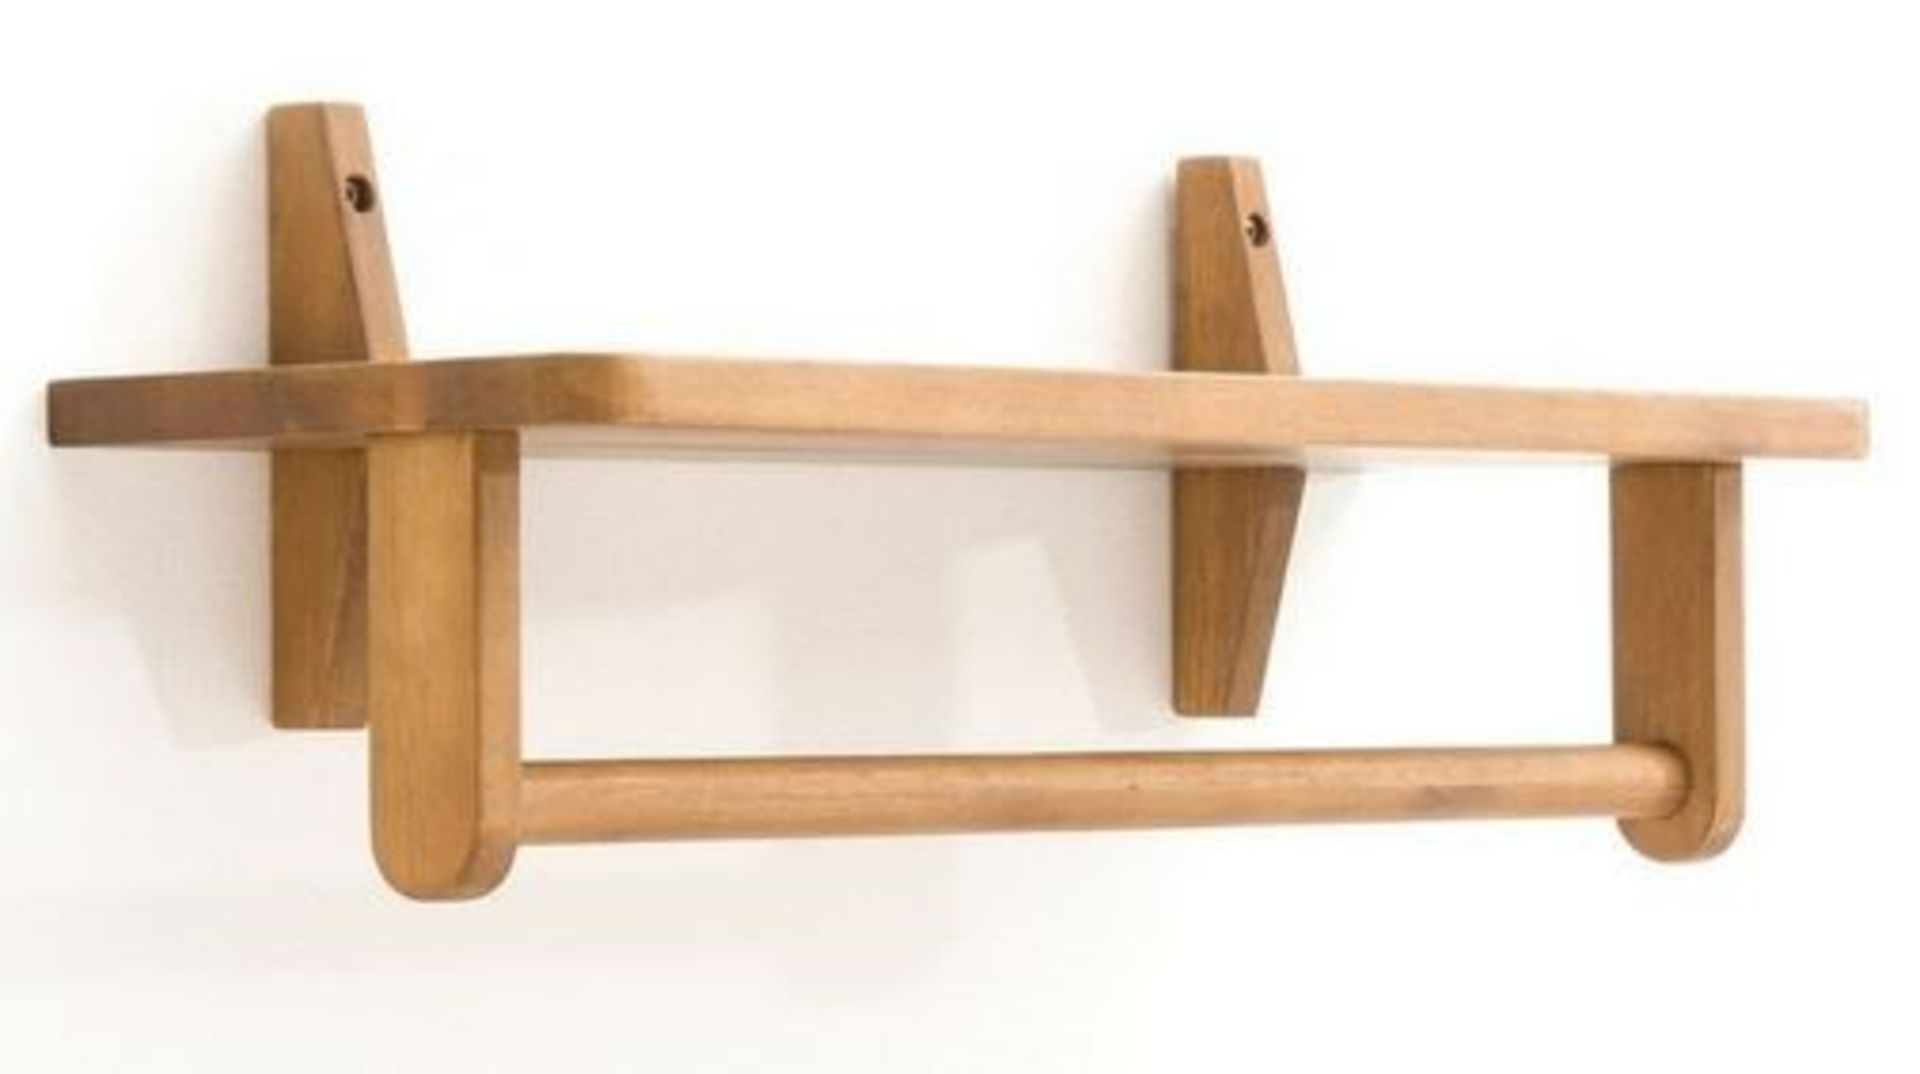 1 GRADE B BOXED DESIGNER WOODEN SHELF IN OAK / RRP £32.99 (PUBLIC VIEWING AVAILABLE)